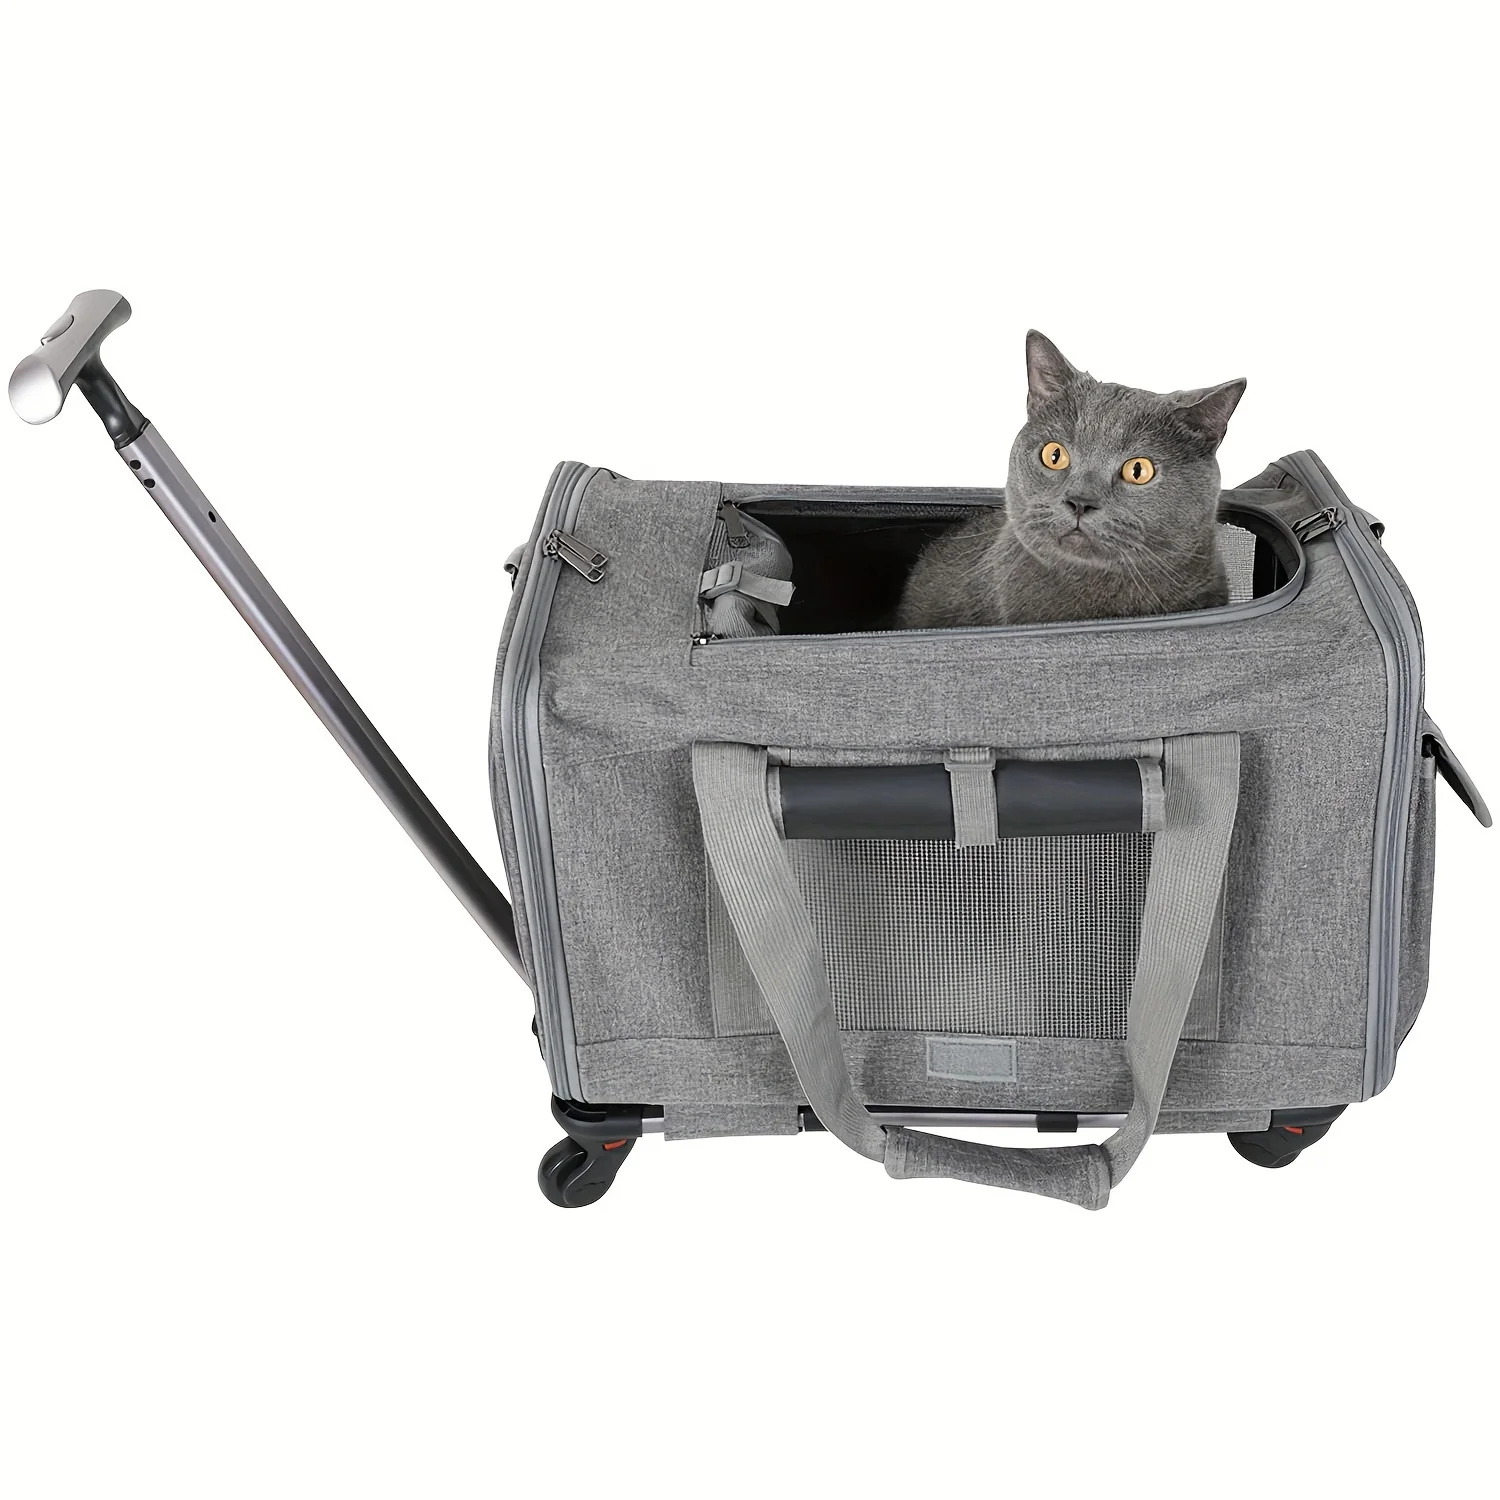 

Comfortable Pet Travel Carrier - Airline Approved with Smooth-Rolling Wheels, Telescopic Handle & Padded Shoulder Strap for On-t